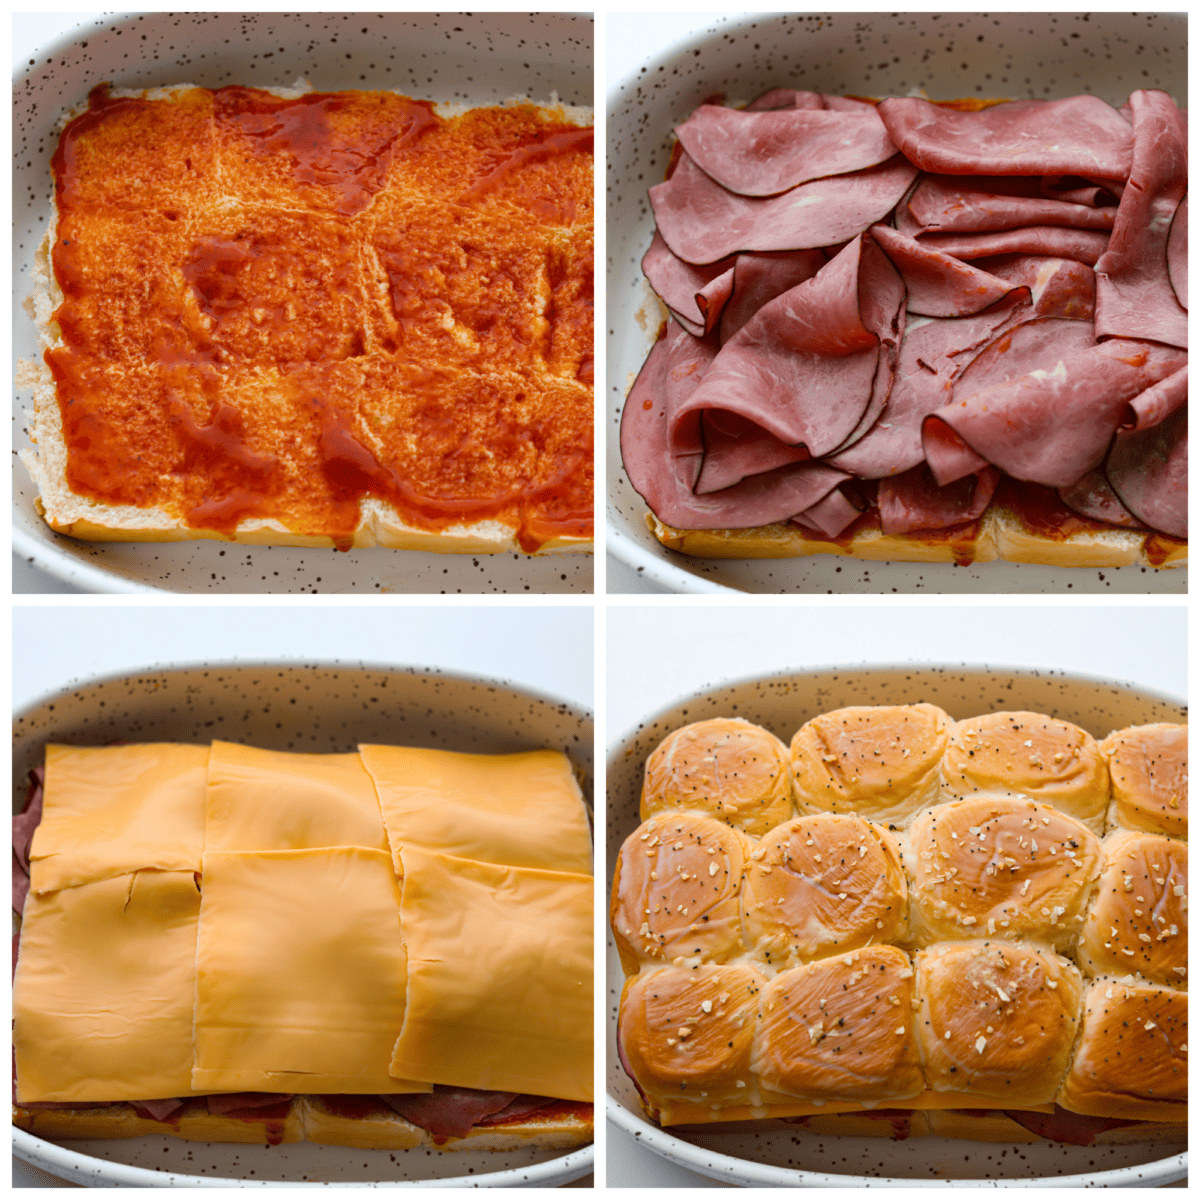 Hawaiian rolls being layered with sauce, meat, and cheese.